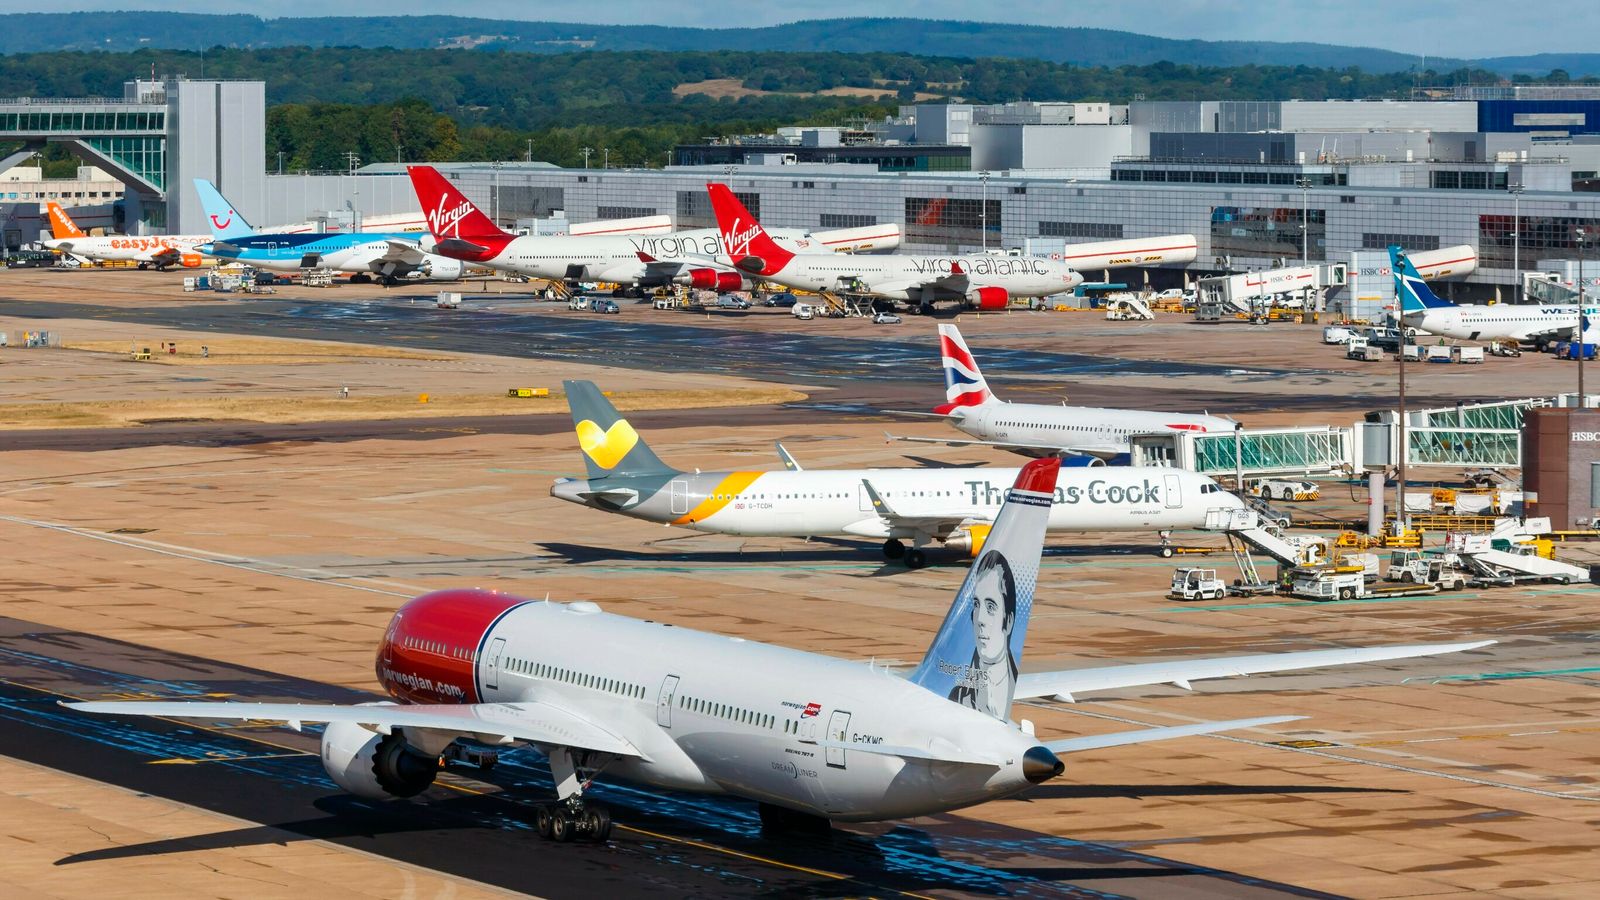 Gatwick strikes: Holidaymakers warned of 'severe disruption' as fresh walkouts announced